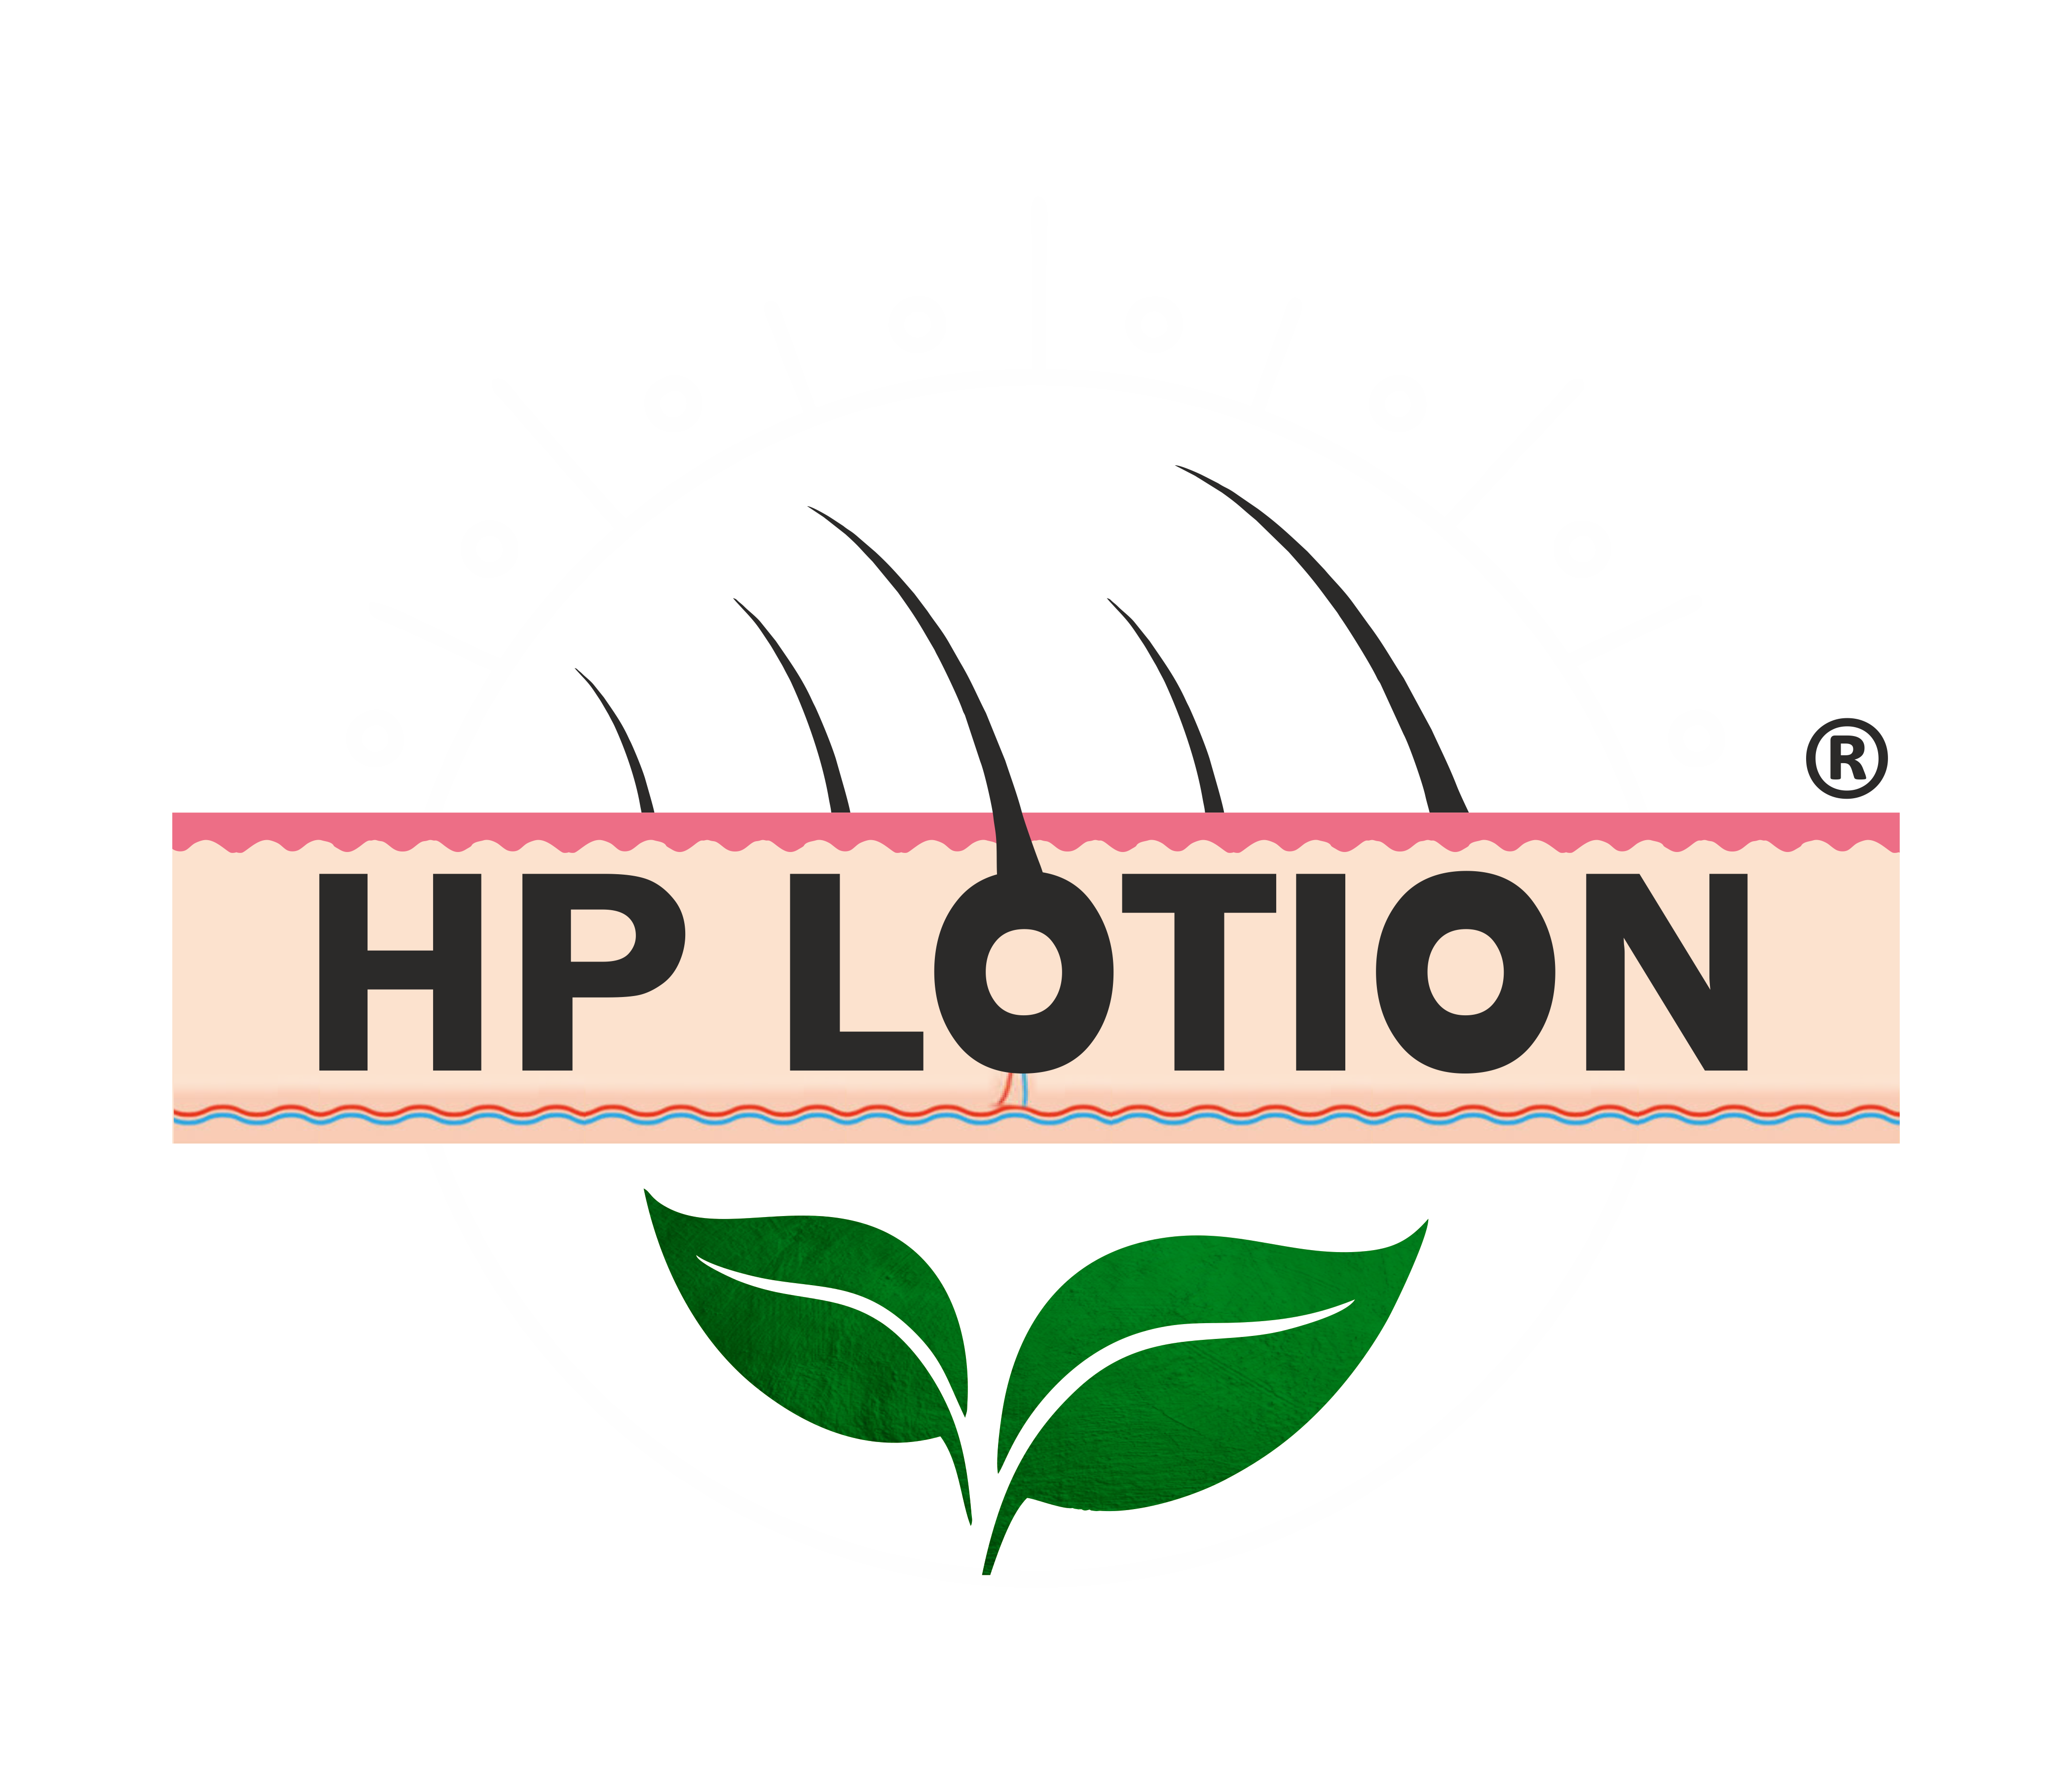 HP Lotion